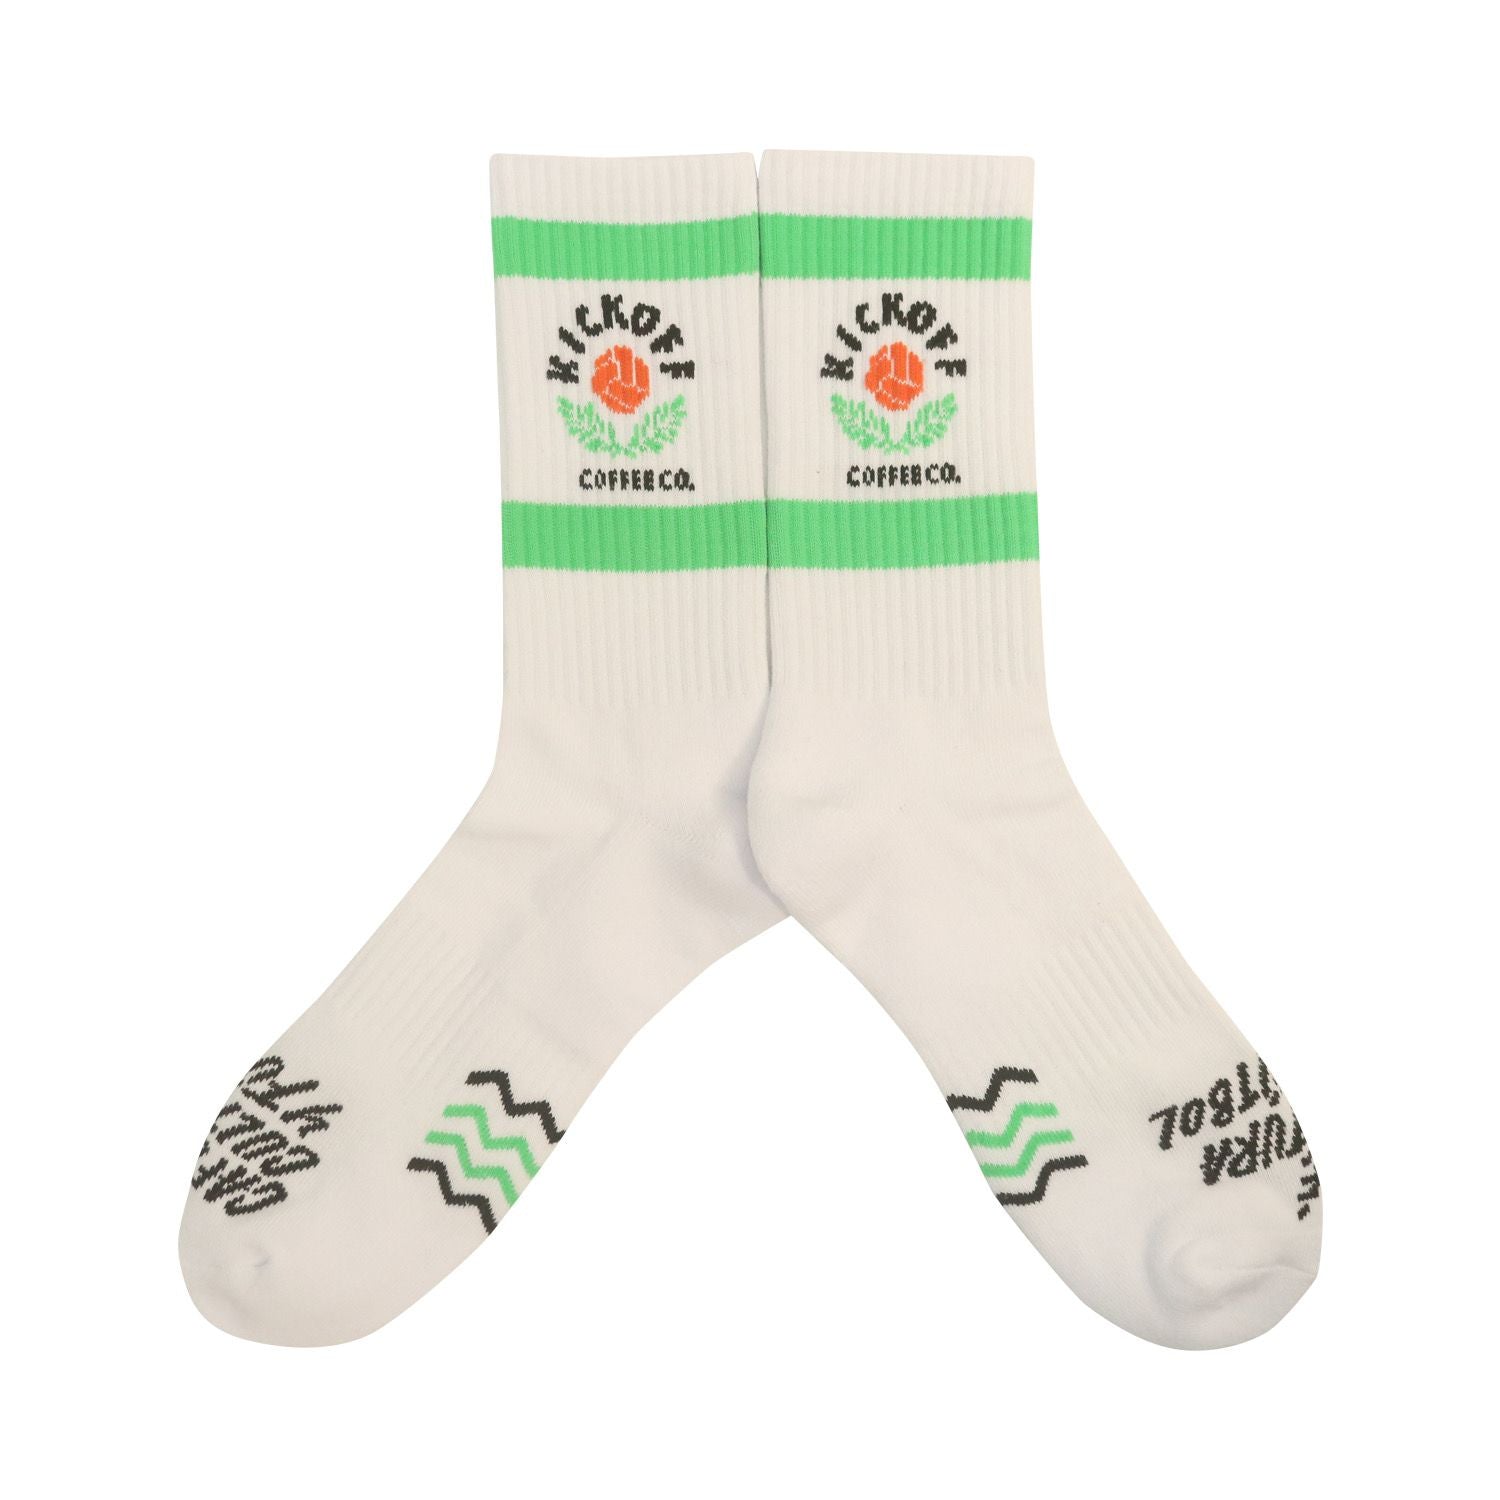 white pair of vintage-style crew socks with green hoops and kickoff coffee co. logo 